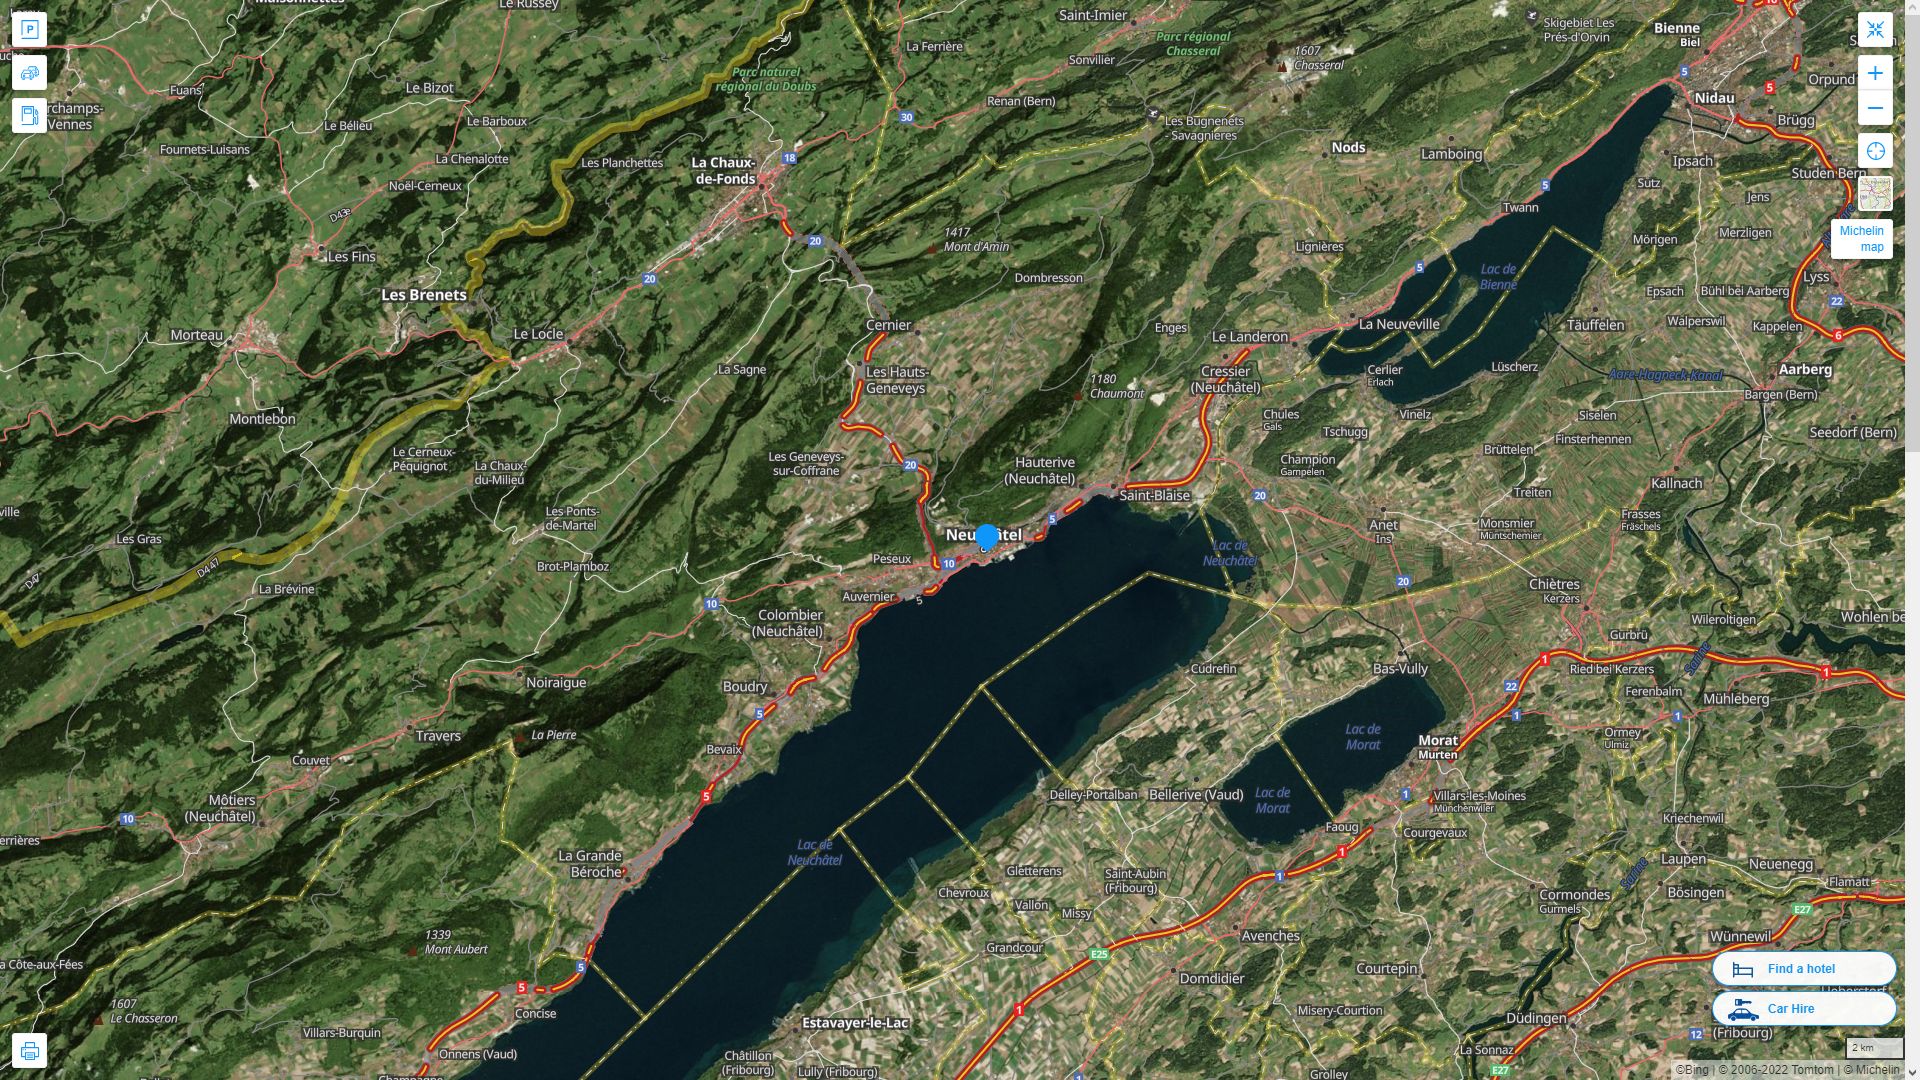 Neuchatel Highway and Road Map with Satellite View